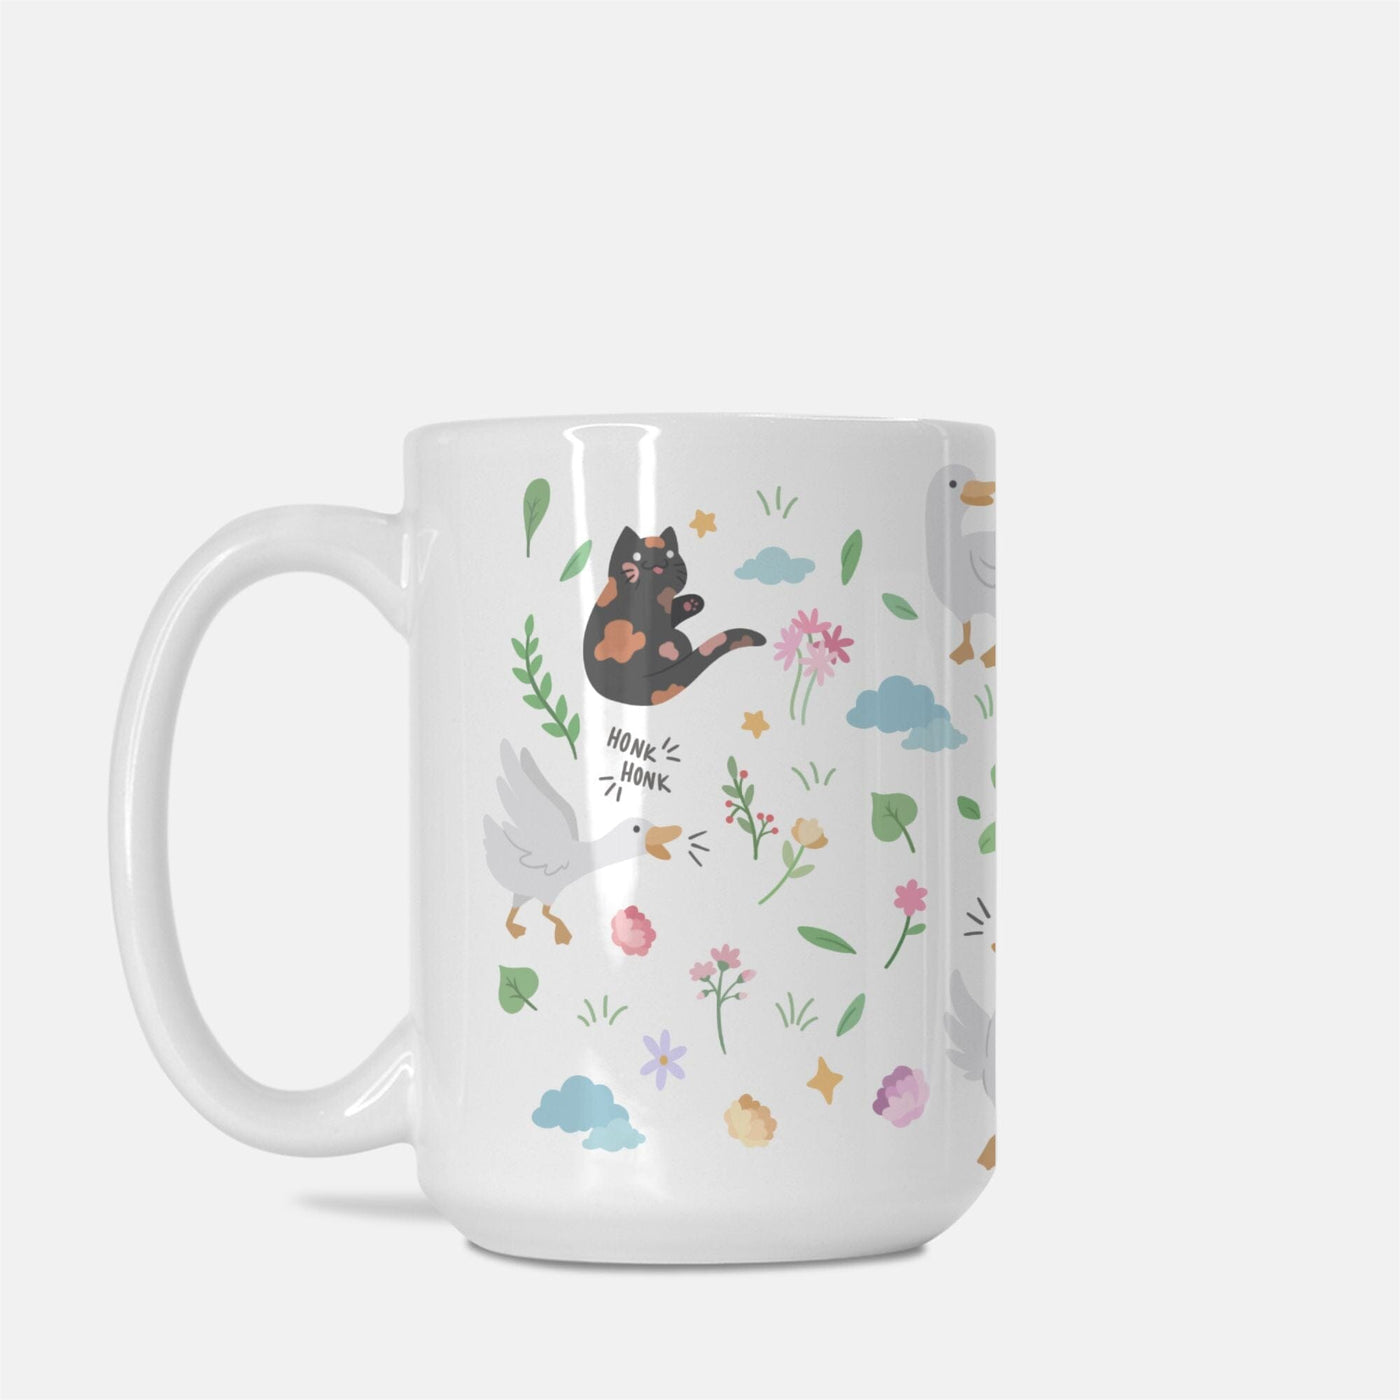 Colorful Goose and Kitties Mug Deluxe 15oz. TTI Stream Mugs Threads & Thistles Inventory 